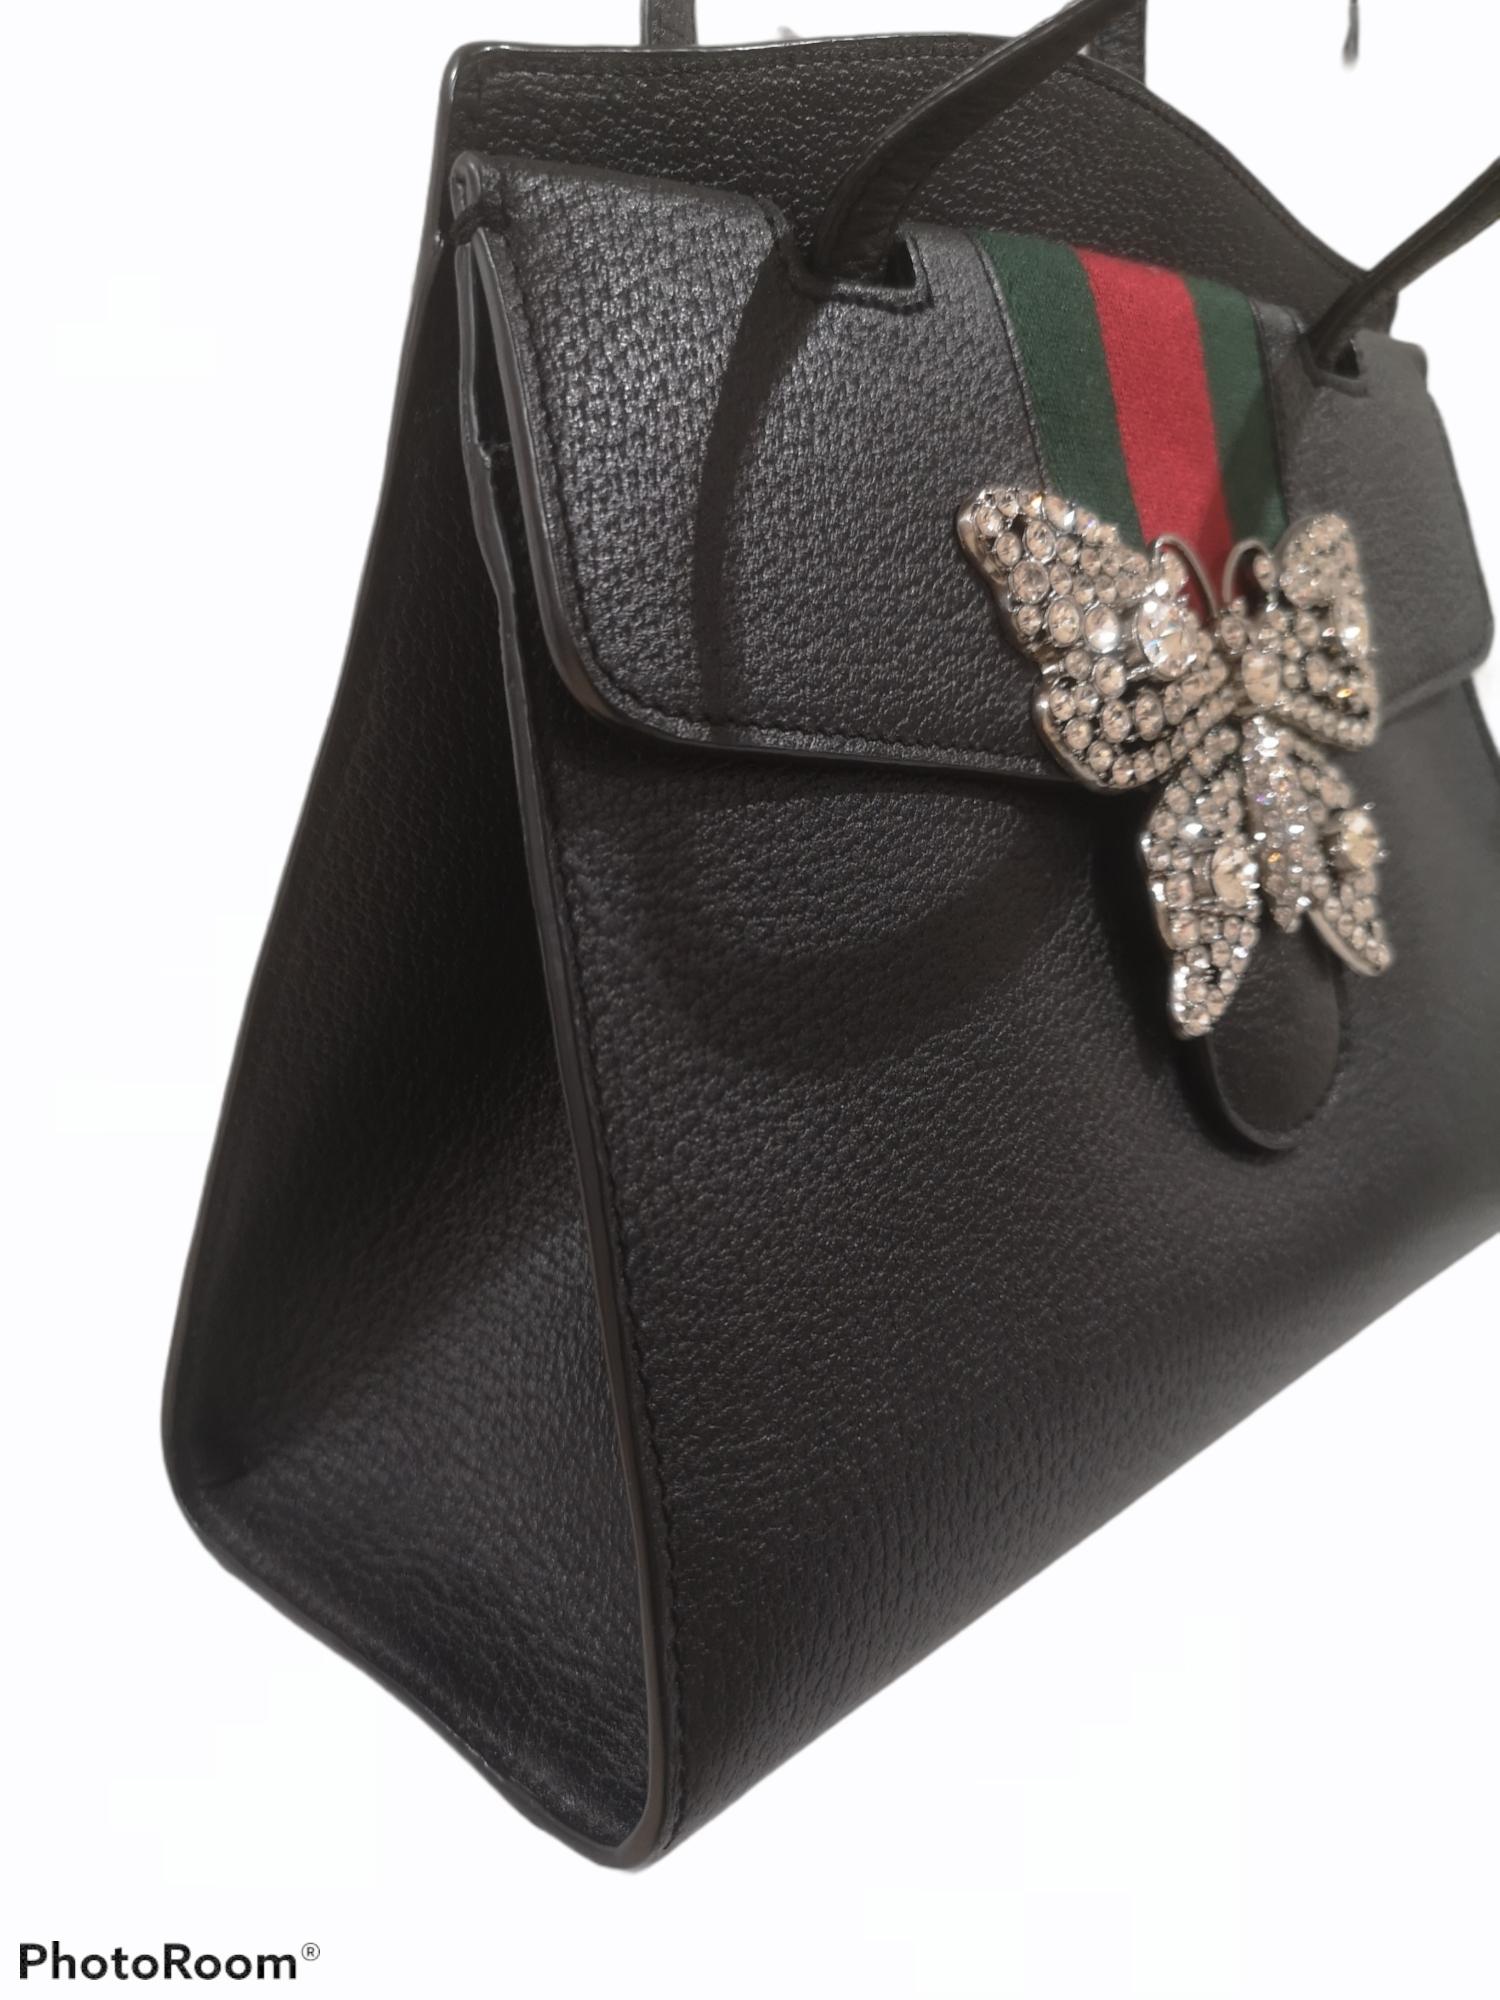 Gucci grained calfskin web butterfly handle bag
This handbag is crafted of lovely textured calfskin leather in black. This bag features a matching leather top handle with a signature Gucci web detail on the flap. The front crossover flap features a